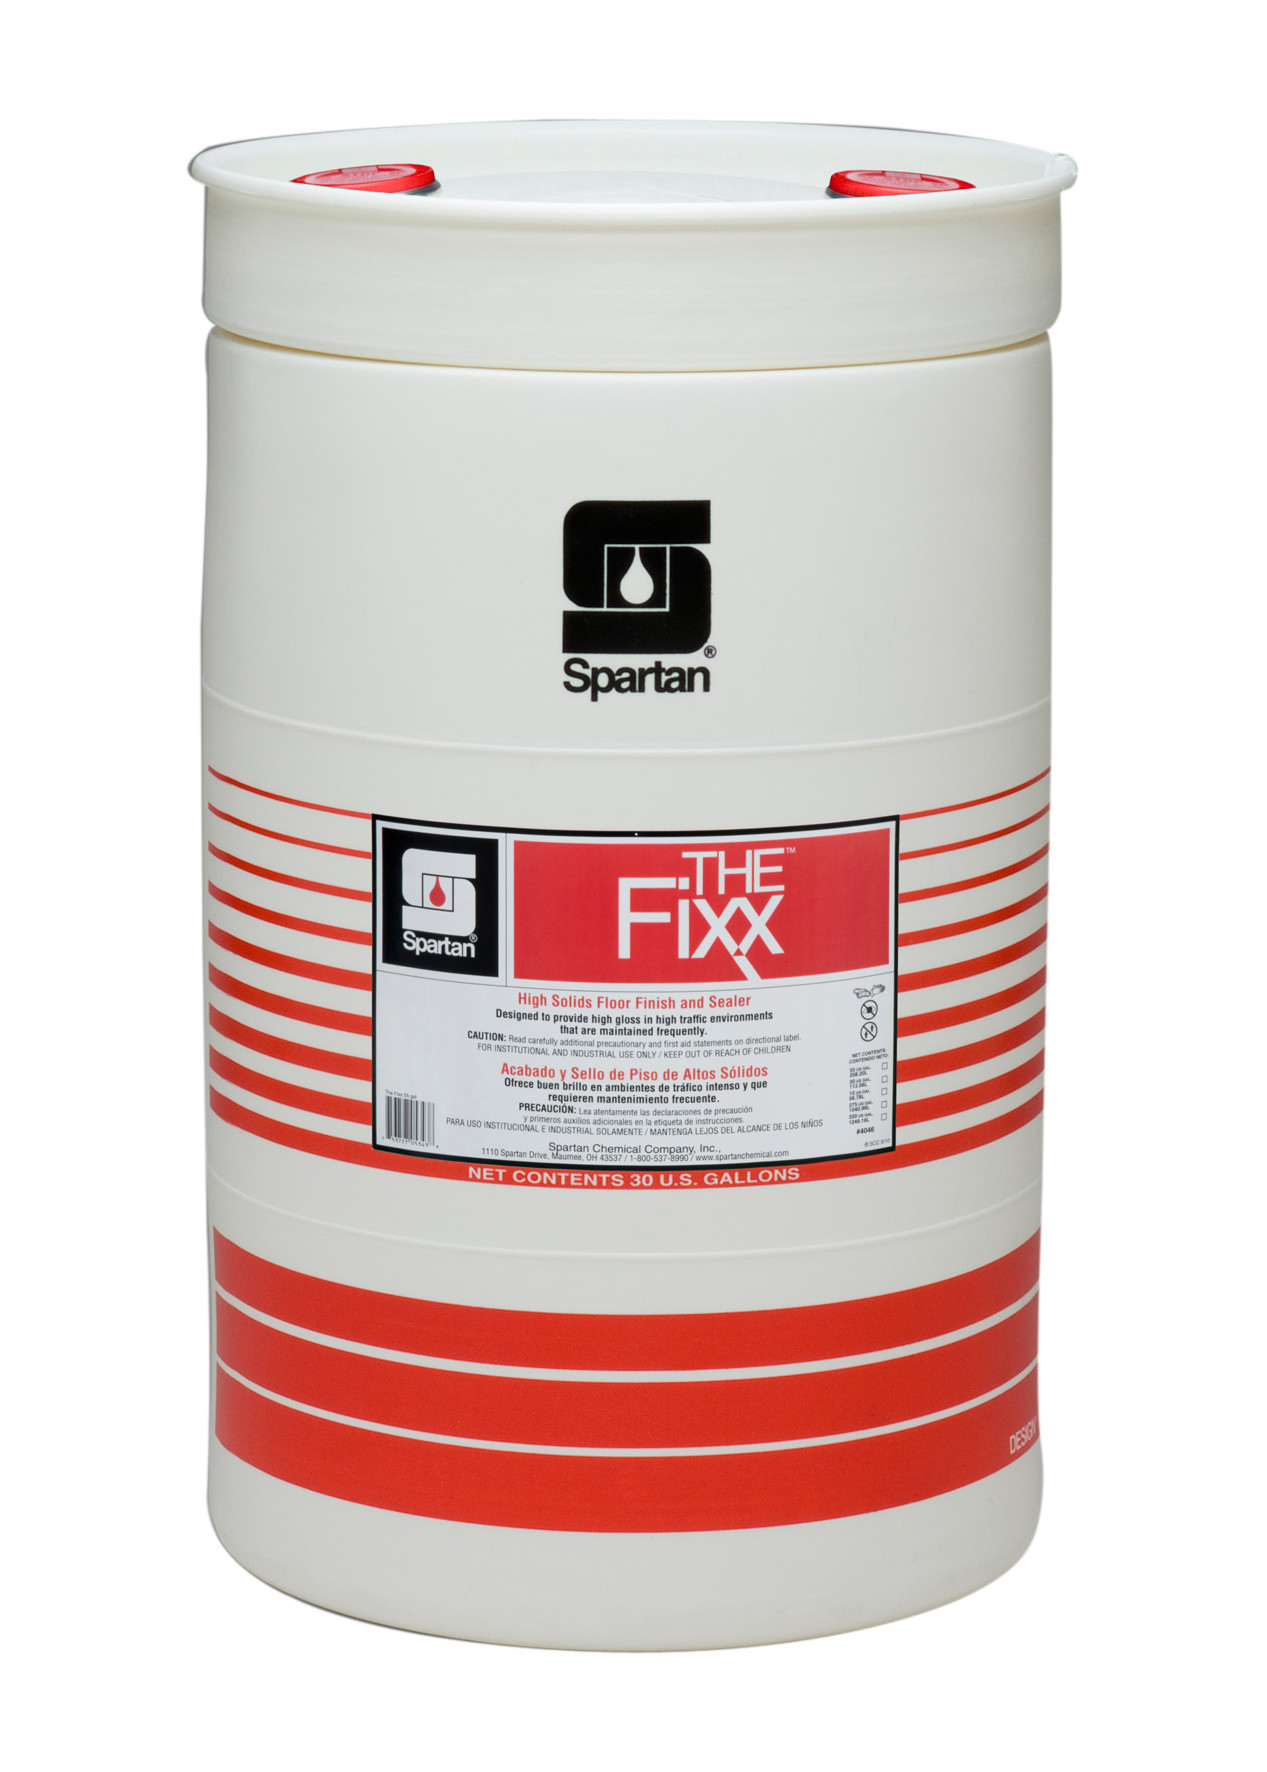 Spartan Chemical Company The Fixx, 30 GAL DRUM